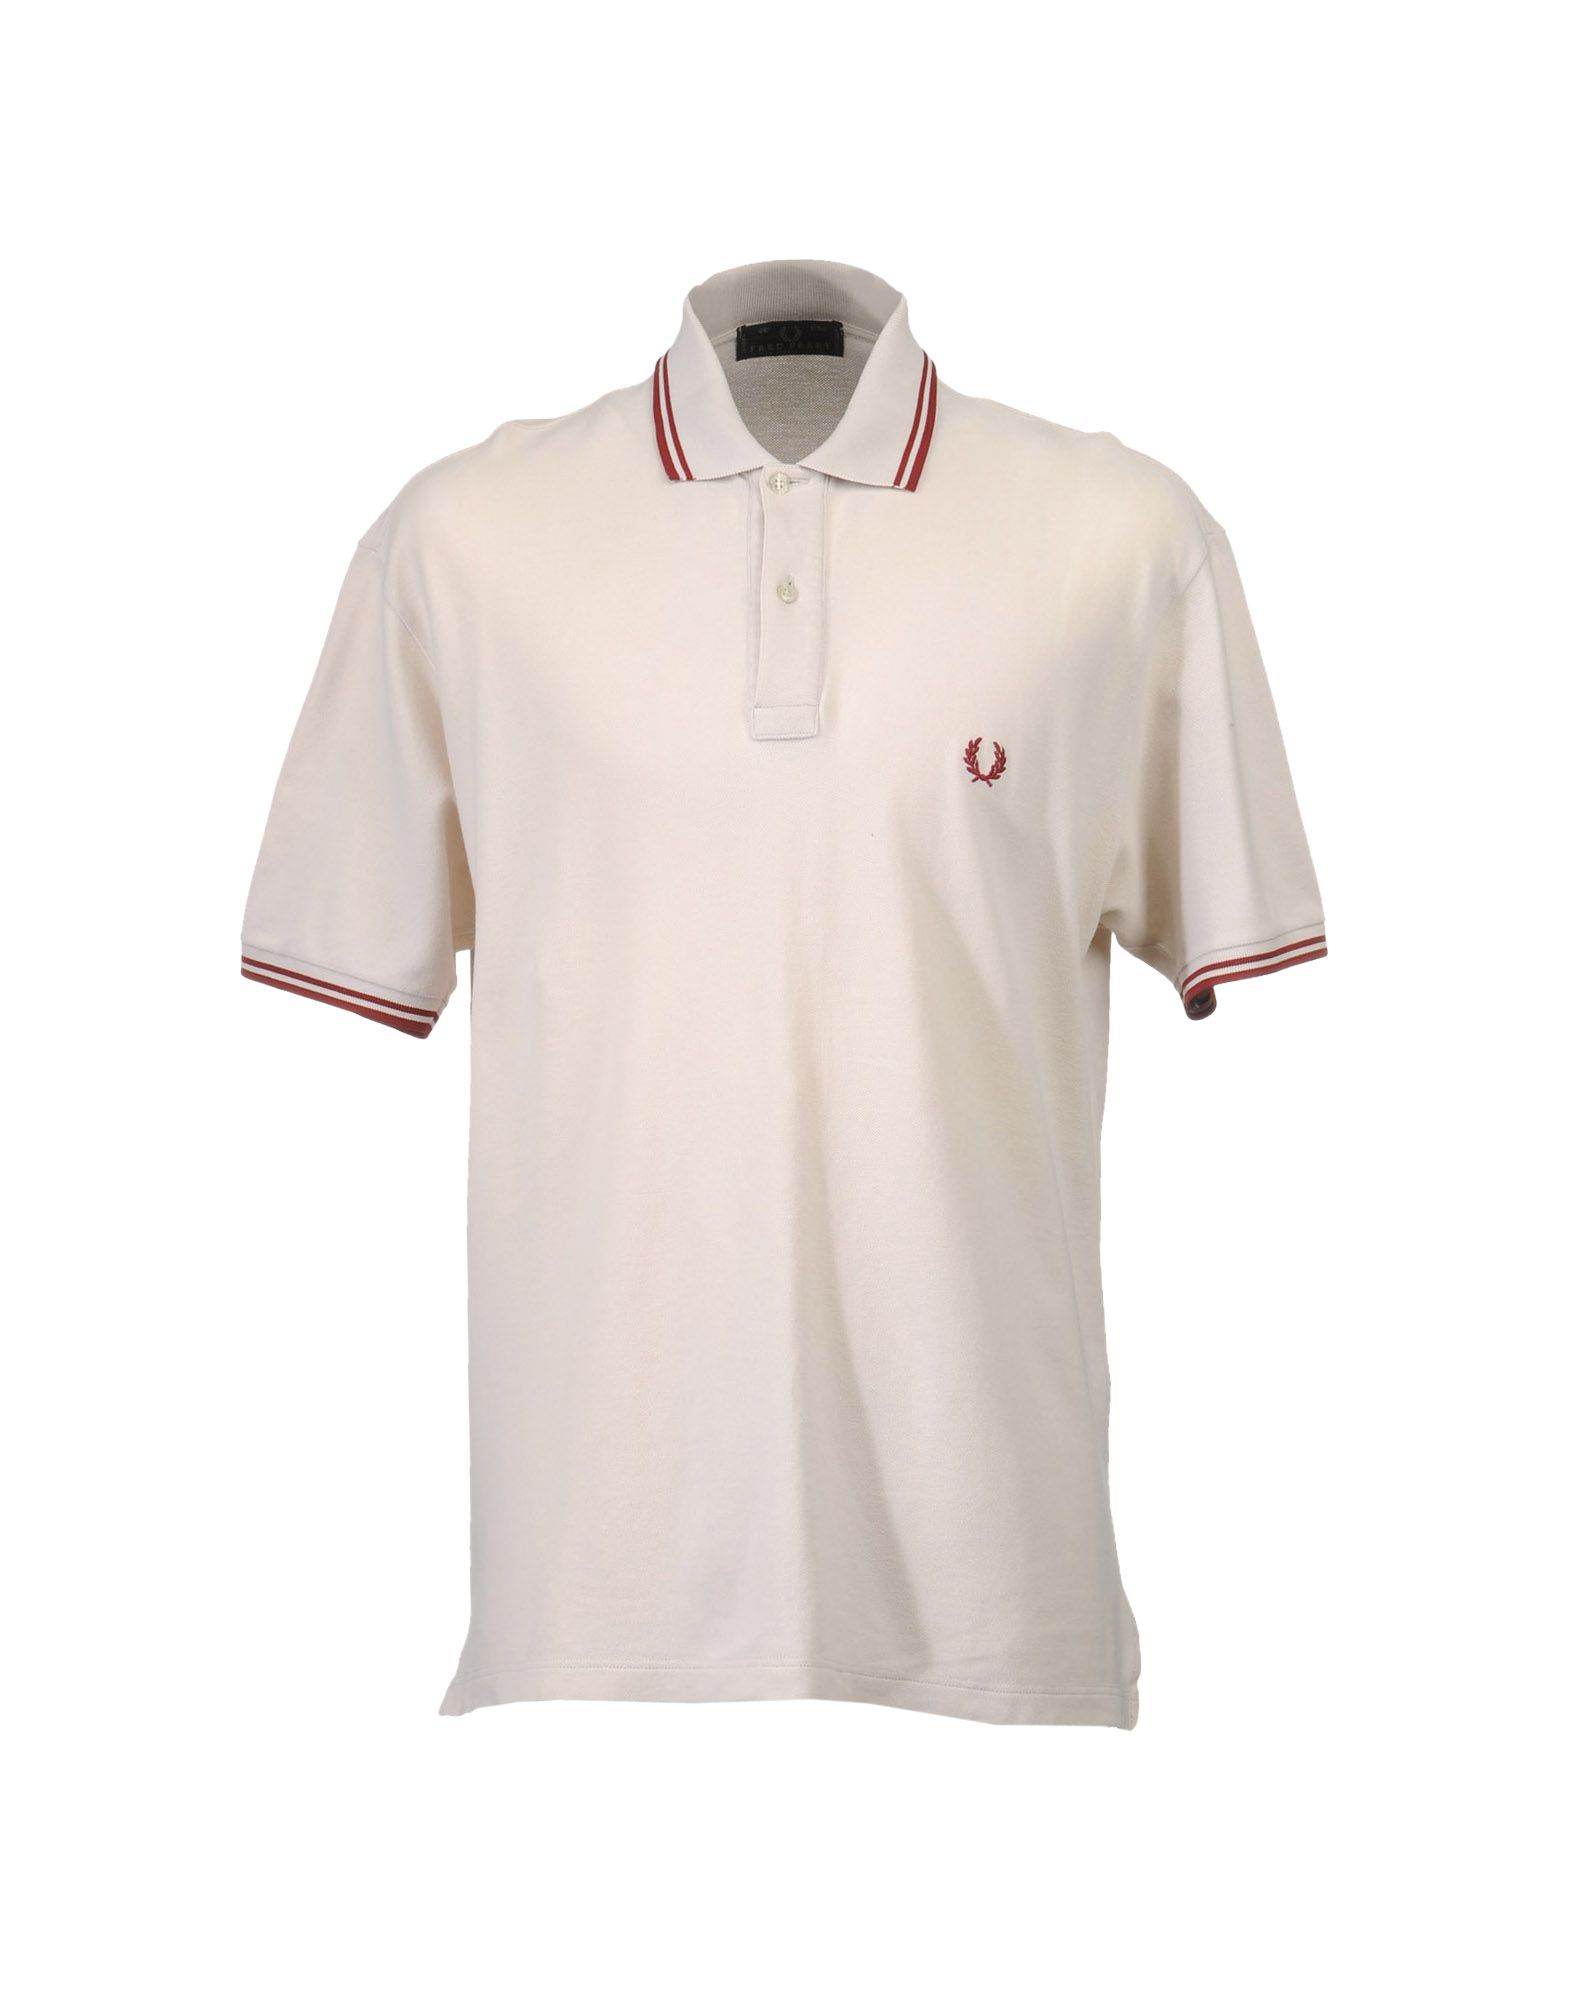 Foto fred perry polos
 foto 321562